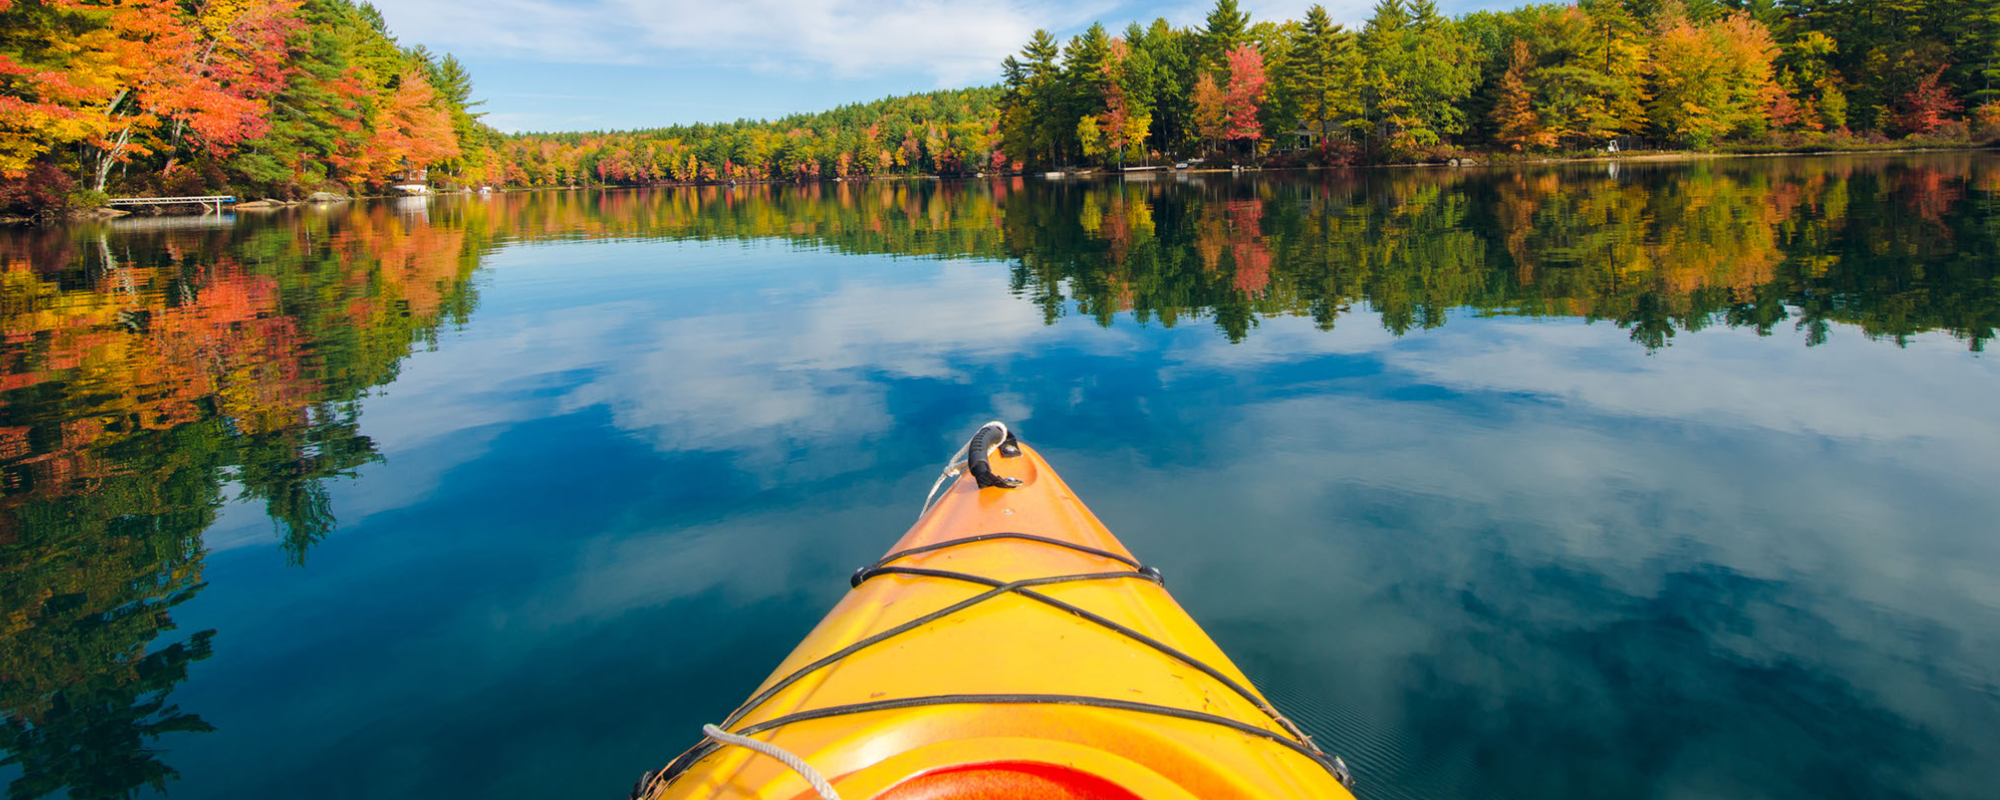 the front of a kayak on a lake with a beautiful fall view